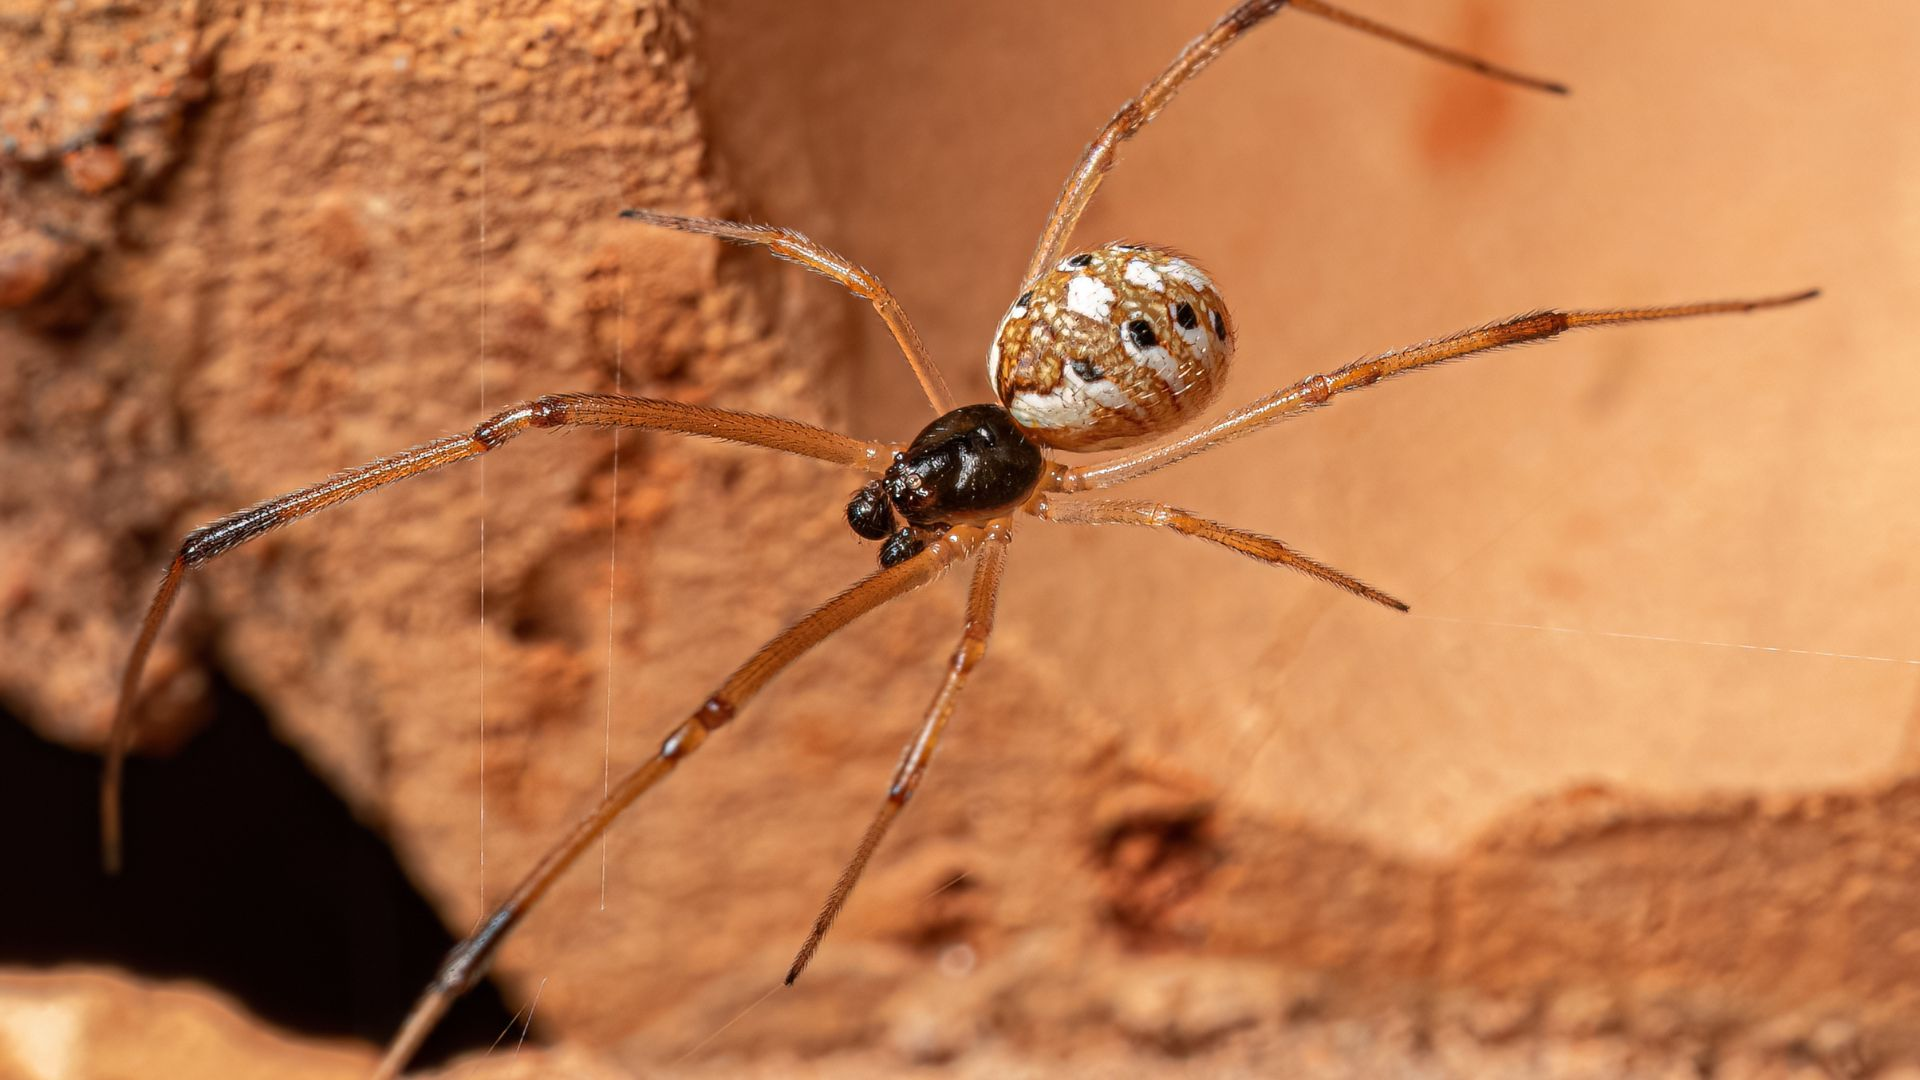 An image of a male black widow spider on a brown background.